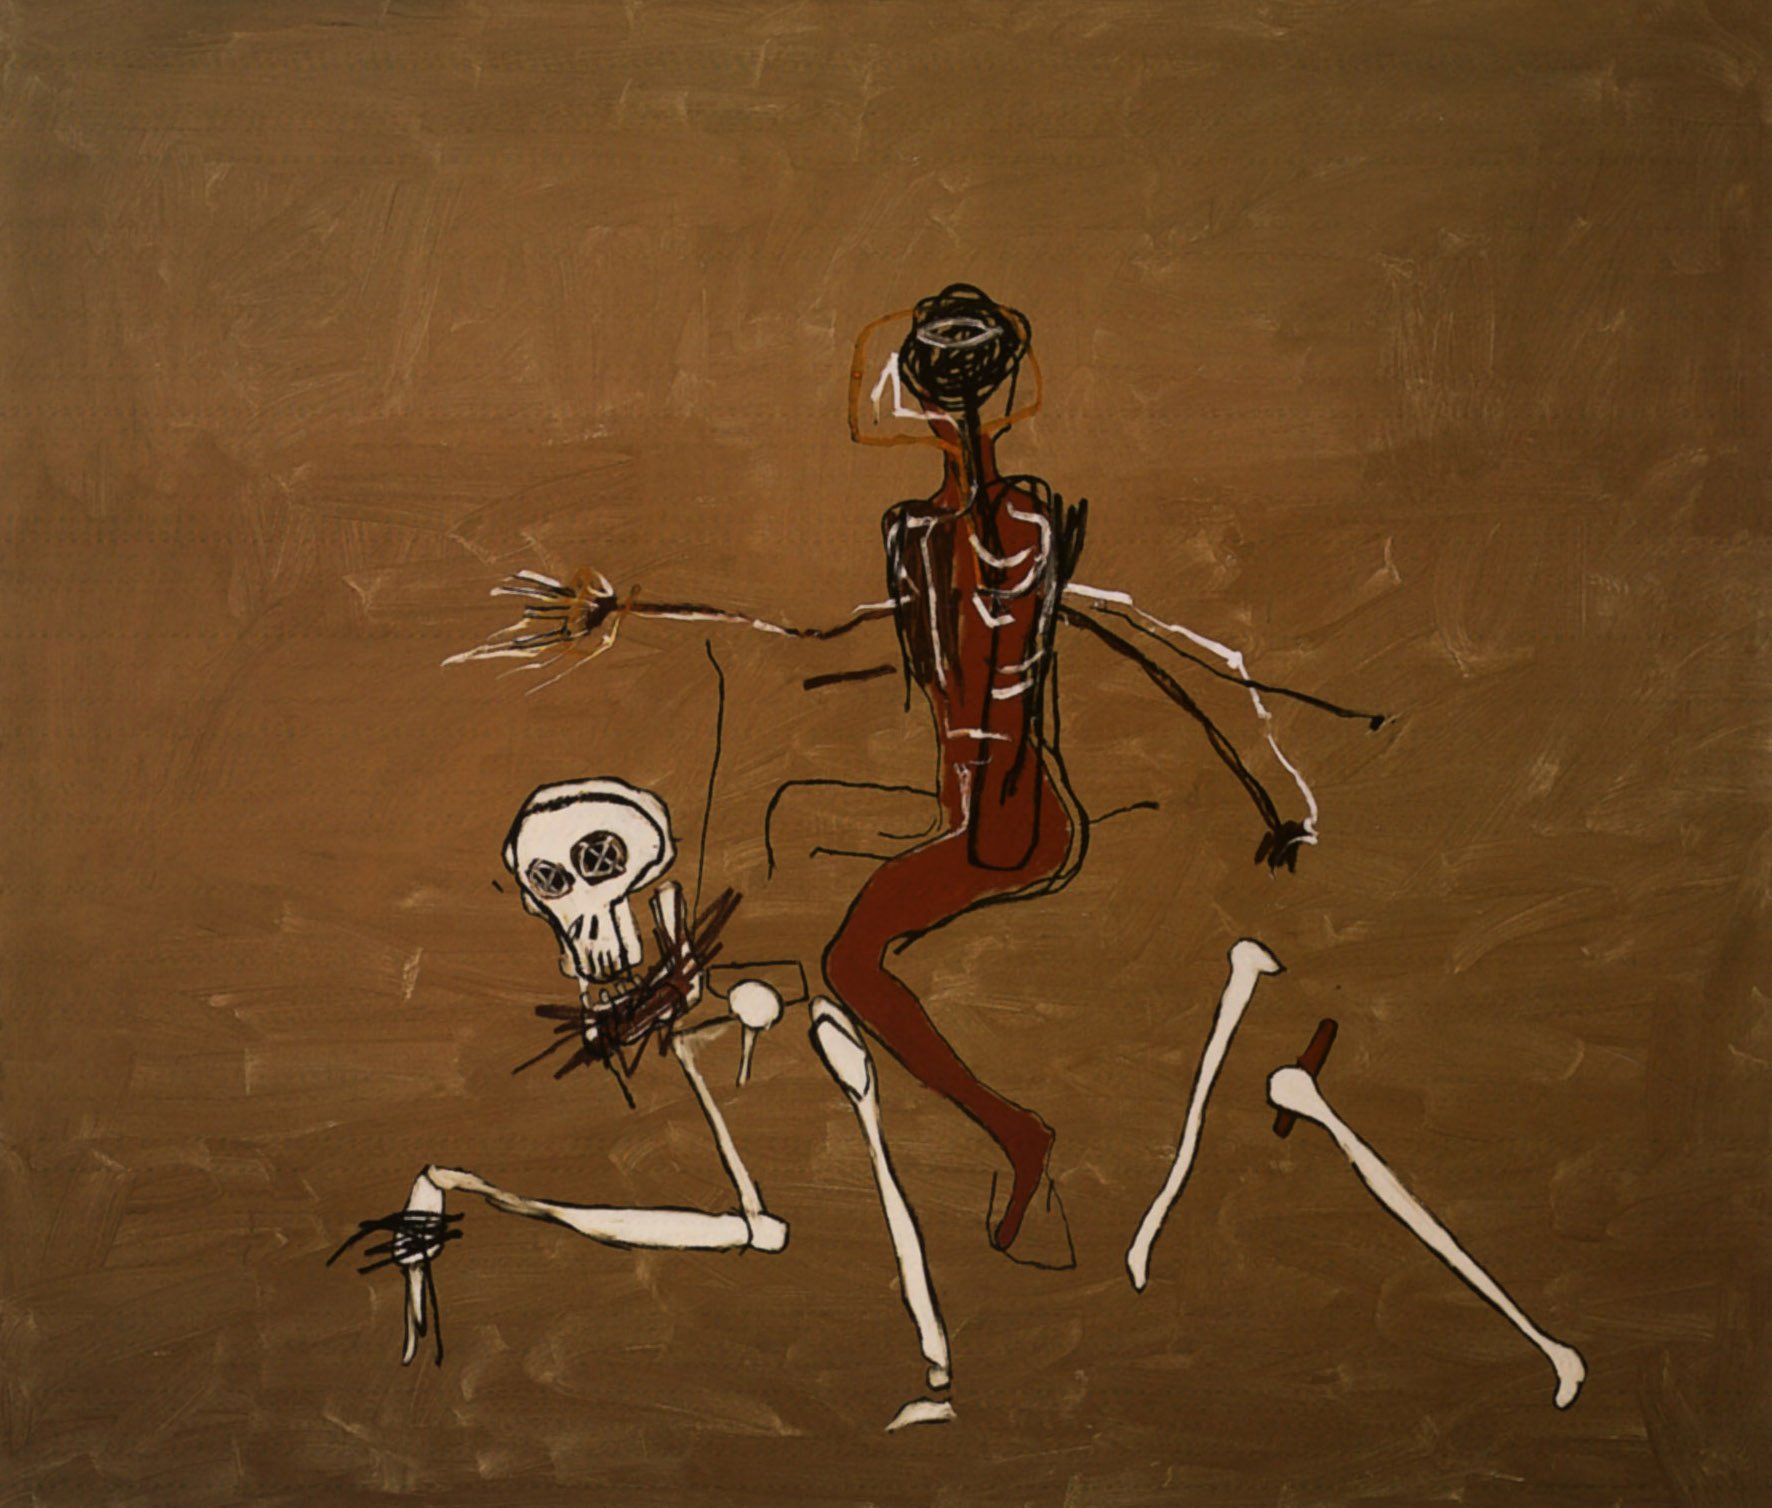 A simplistic painting of an African-American stick figure, possibly an autobiographical representation of the artist, Jean-Michel Basquiat, riding atop a white skeleton. They're set against a sparse, grainy beige backdrop, hinting at deep societal issues and a grim outlook for the future.